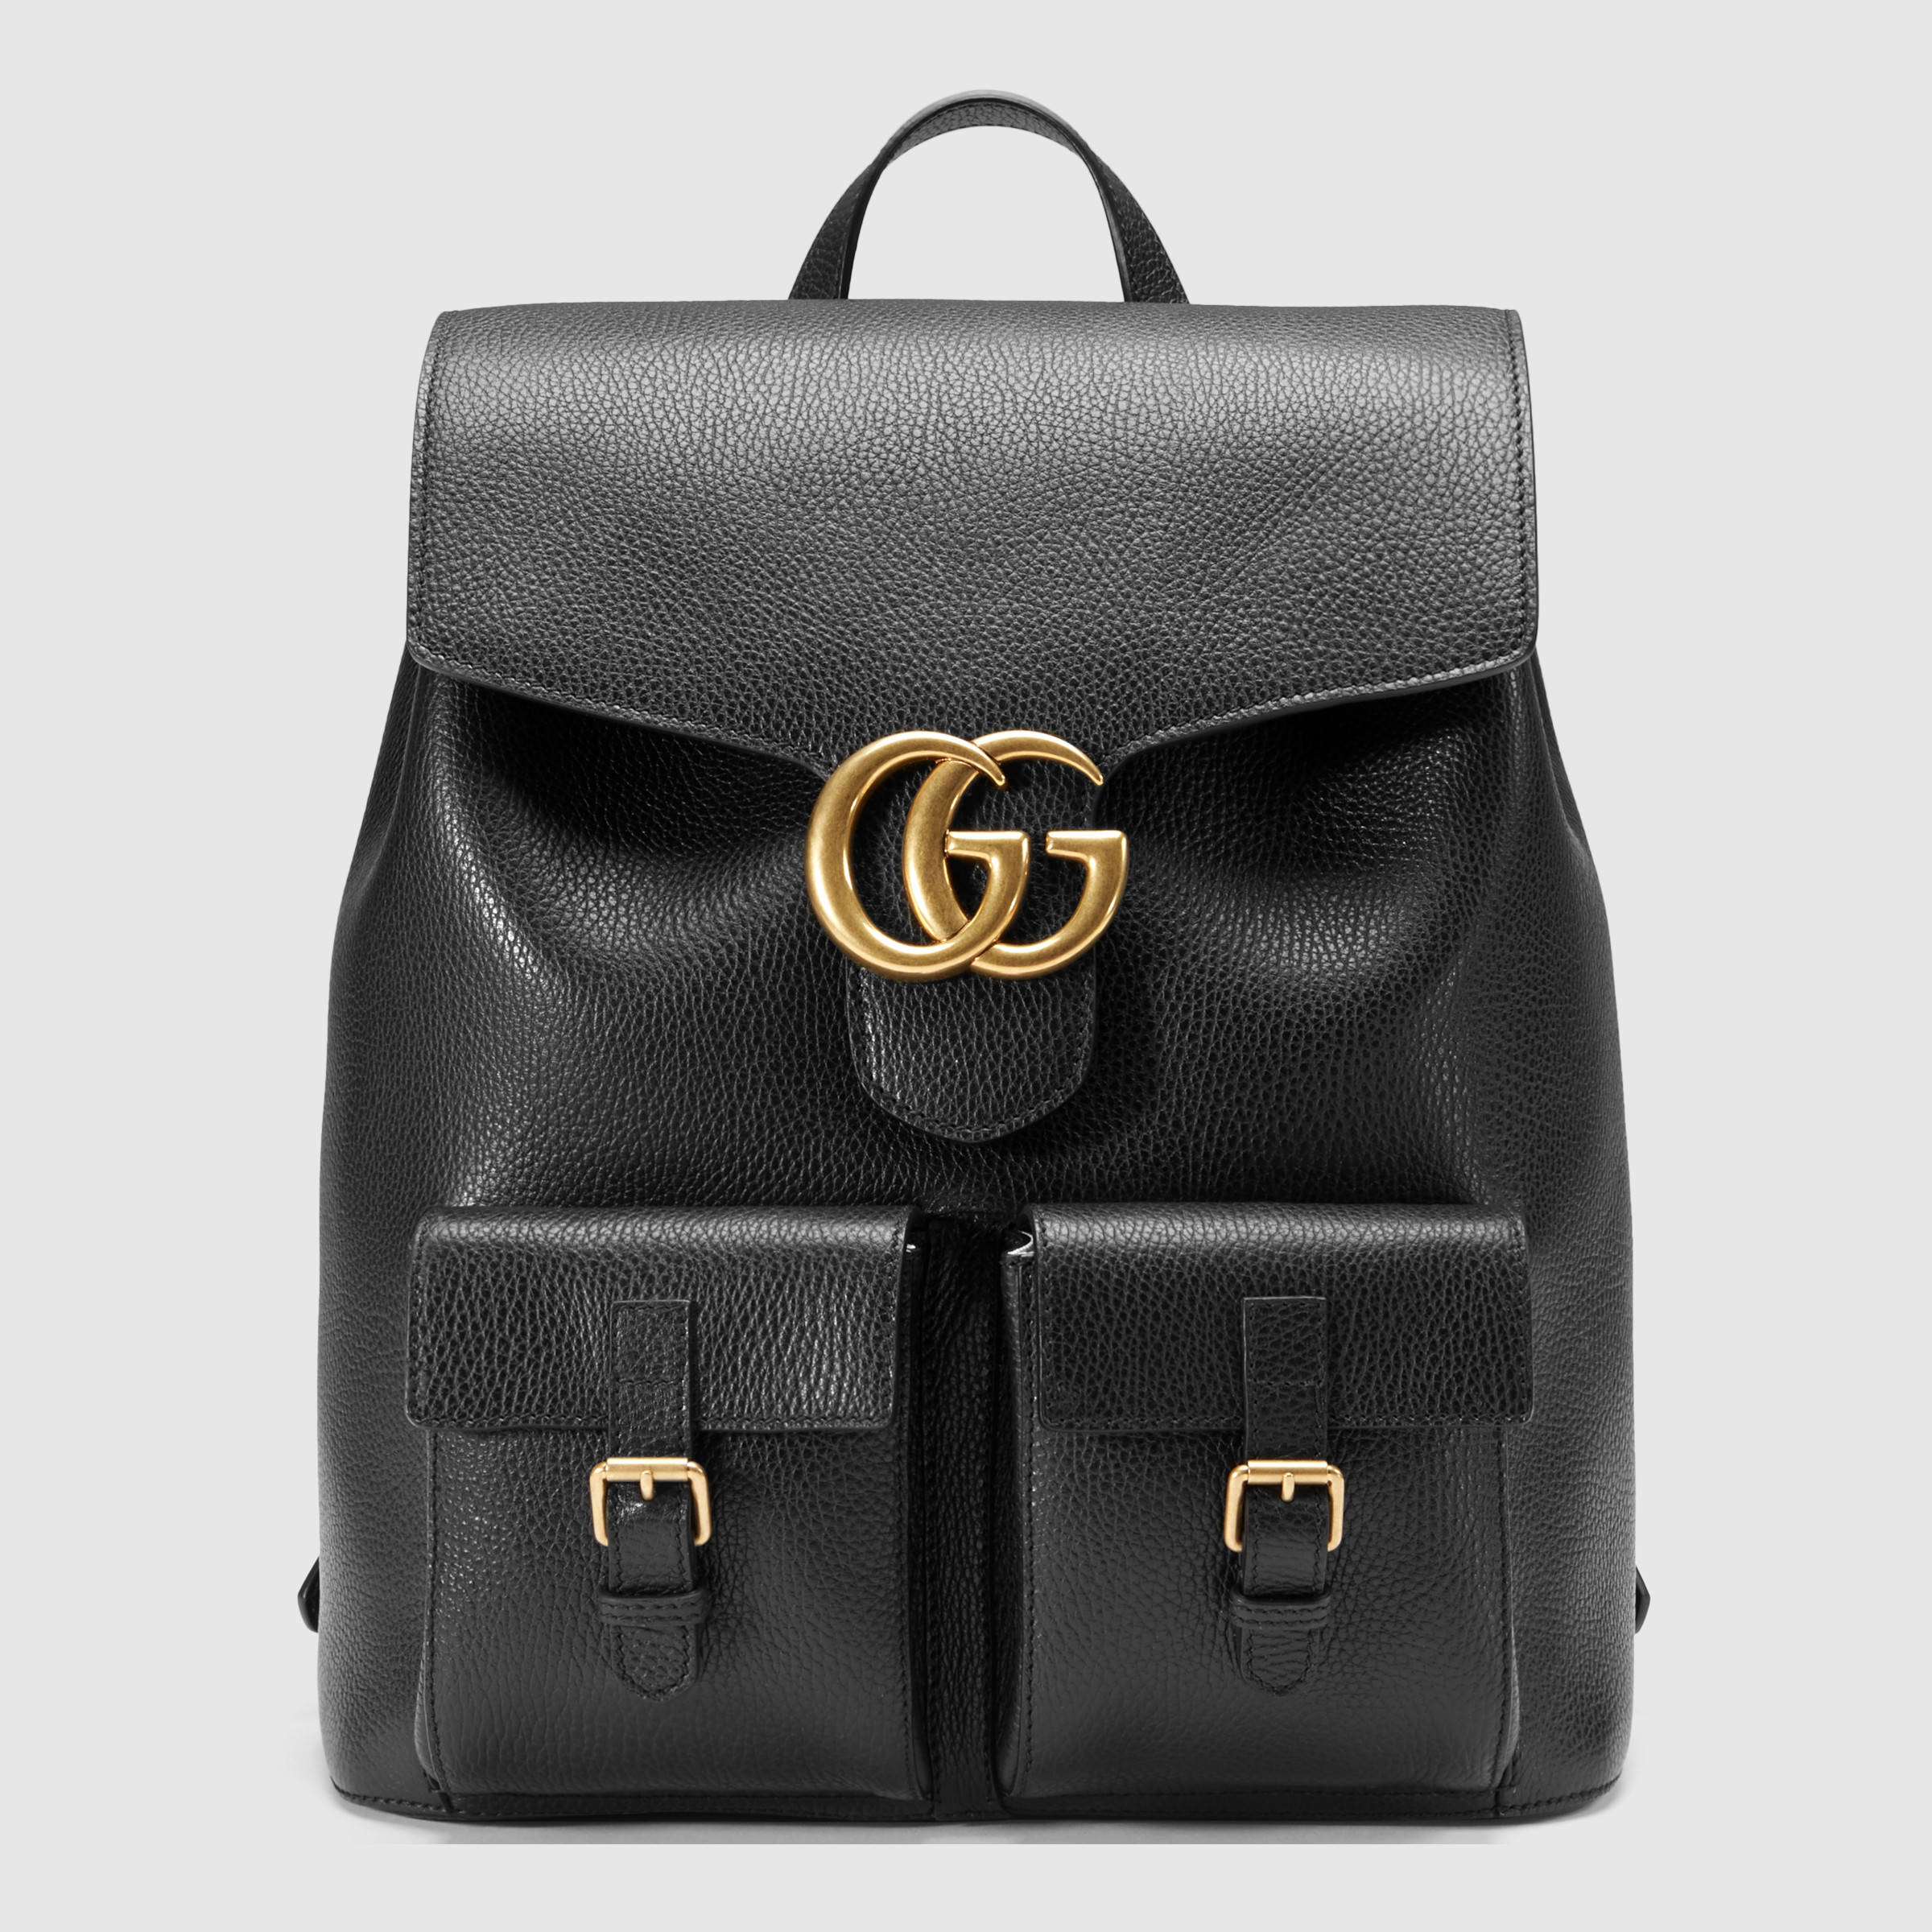 Gucci Gg Marmont Leather Backpack in Multicolour | Lyst